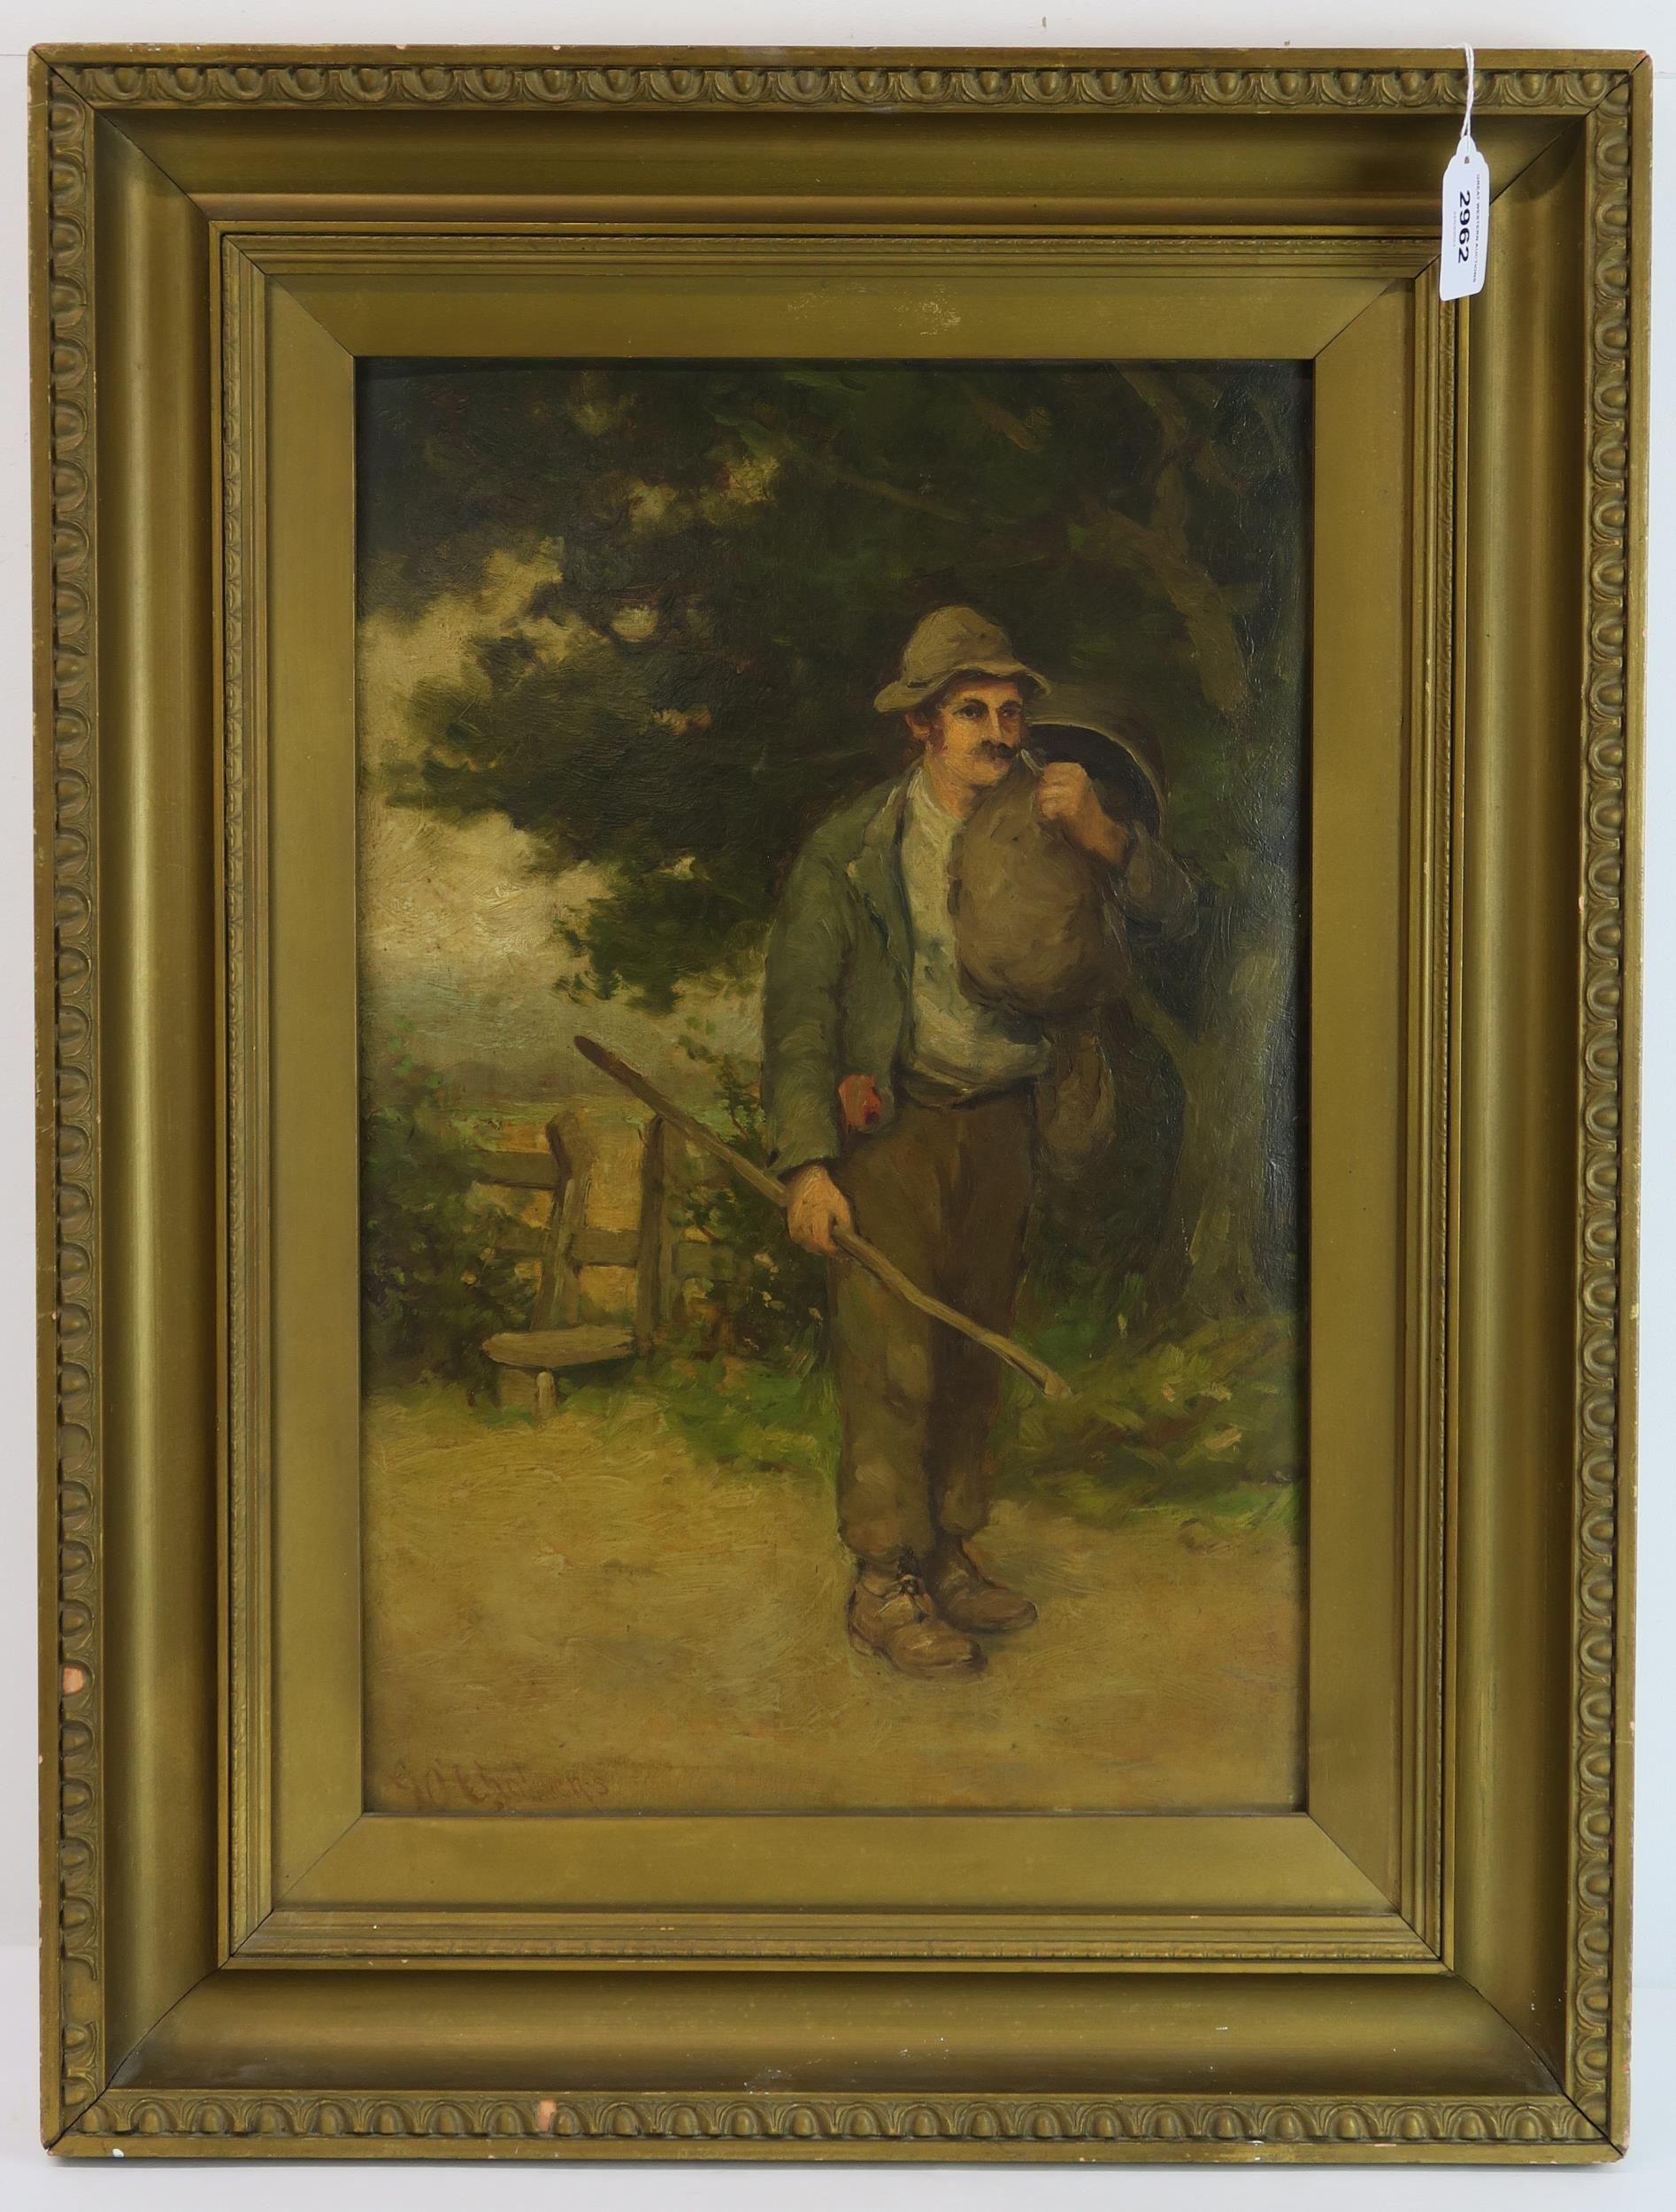 * CHALMERS  LONG DAY AT WORK  Oil on board, signed lower left, 45 x 29cm (17.75 x 11.5") Condition - Image 2 of 4